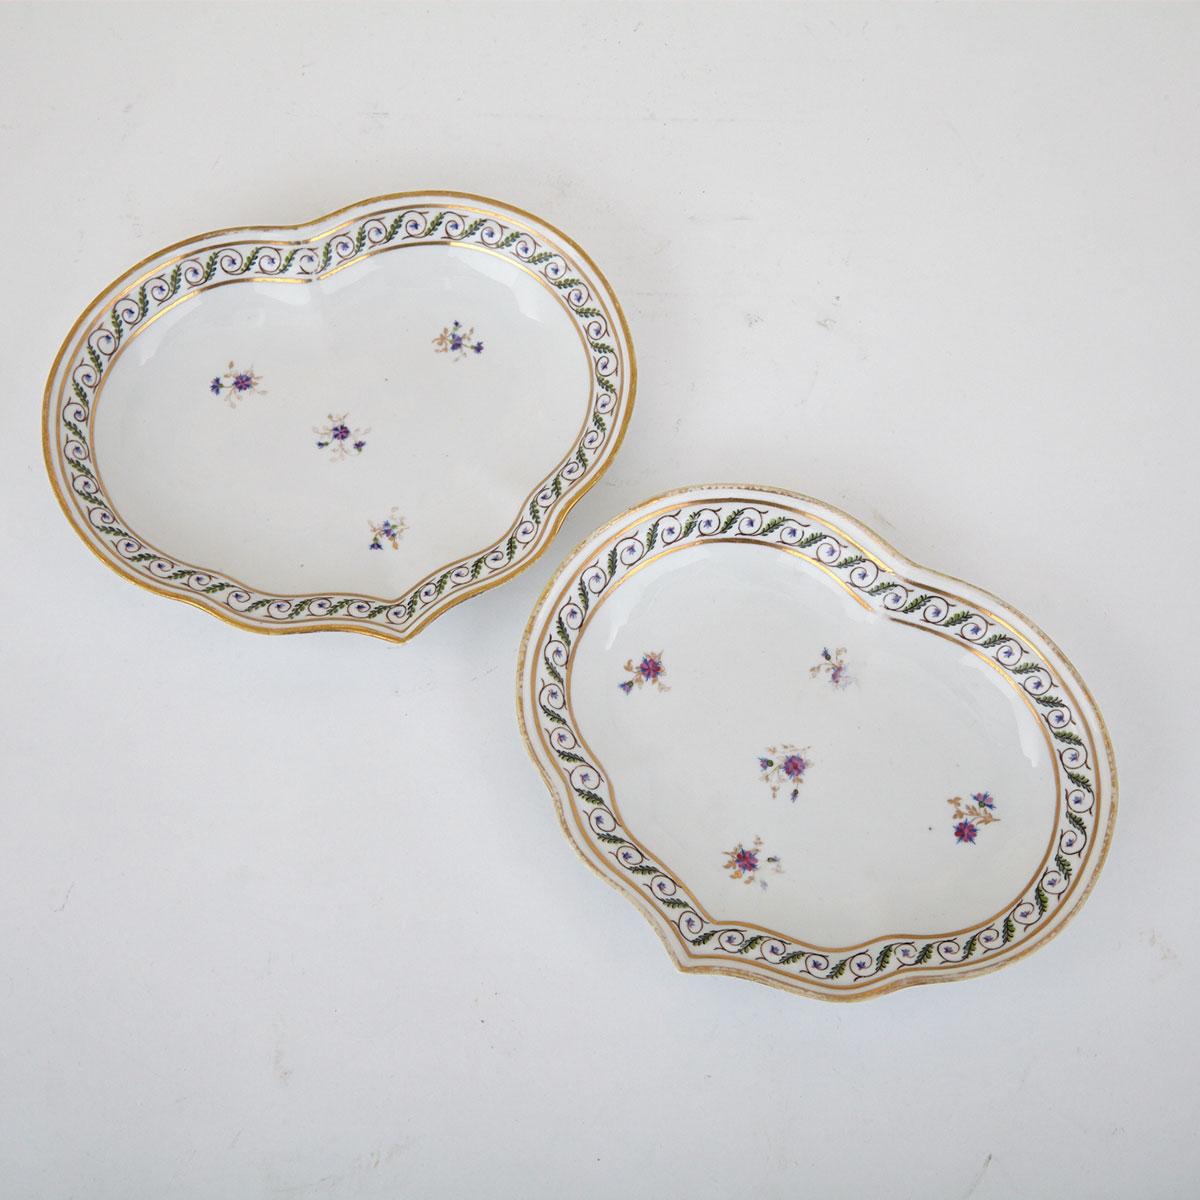 Pair of Derby Kidney Shaped Dishes, c.1800